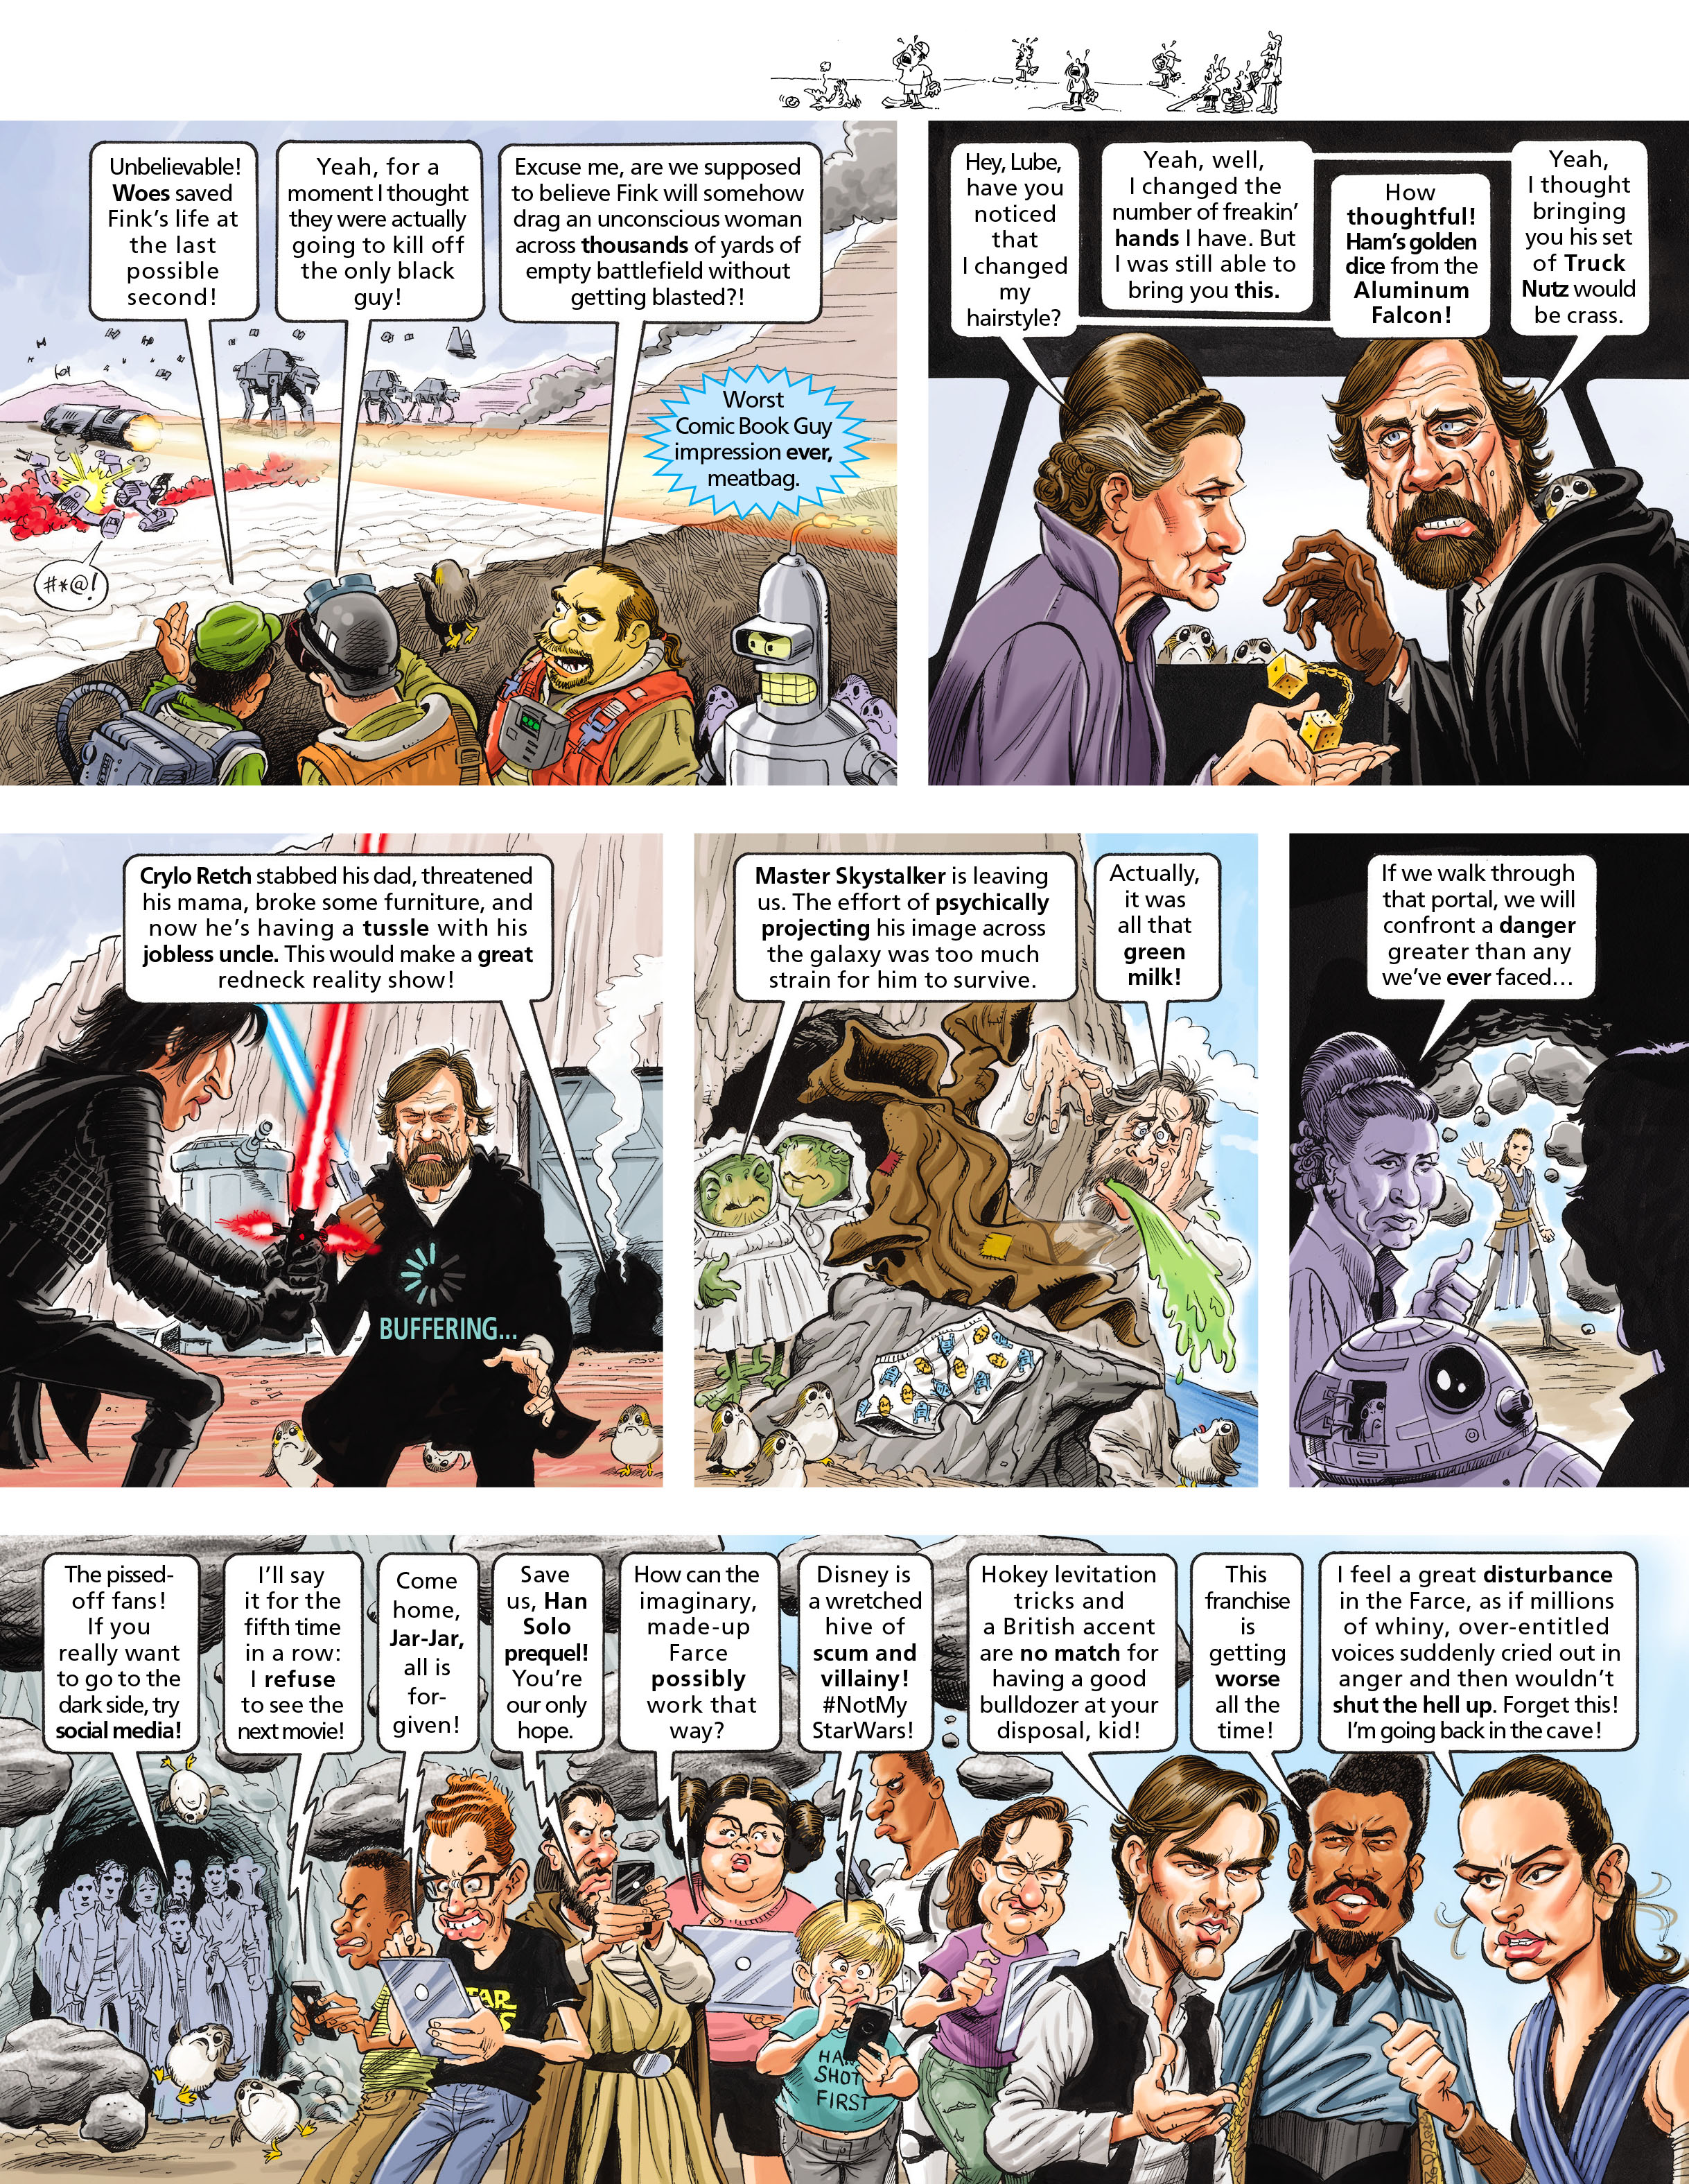 MAD Magazine (2018-) Chapter 21 - Page 37